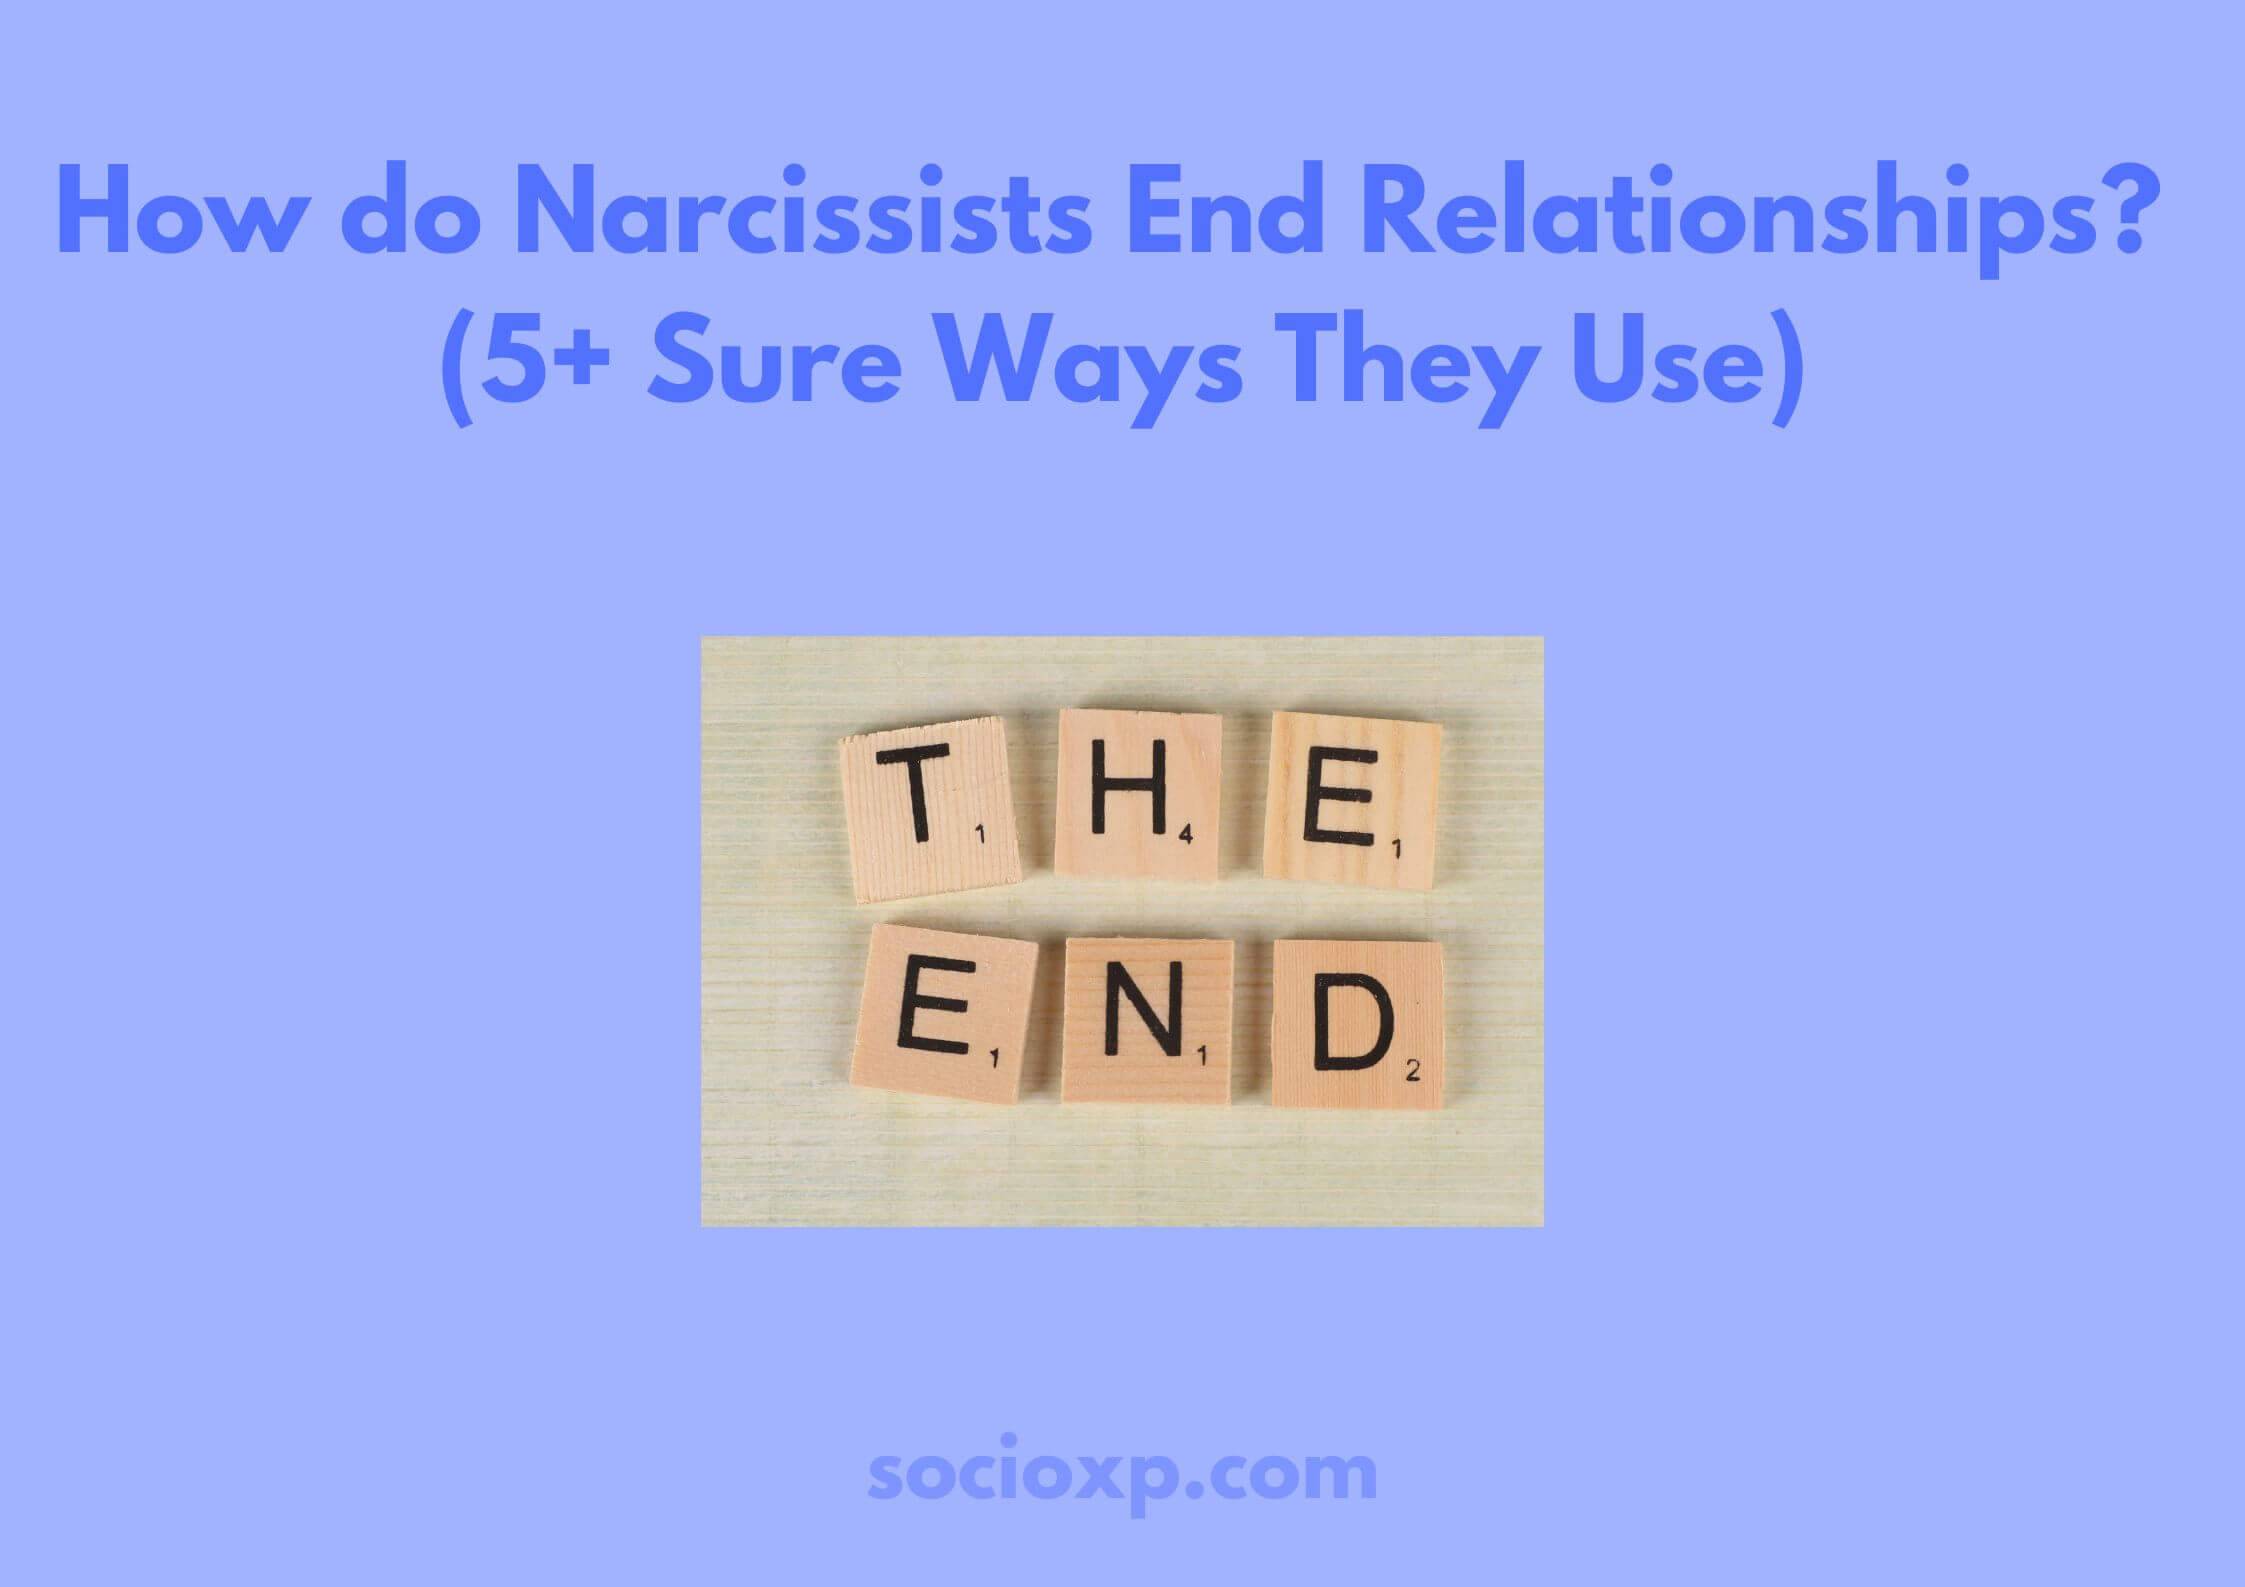 How Do Narcissists End Relationships? (5+ Sure Ways They Use)